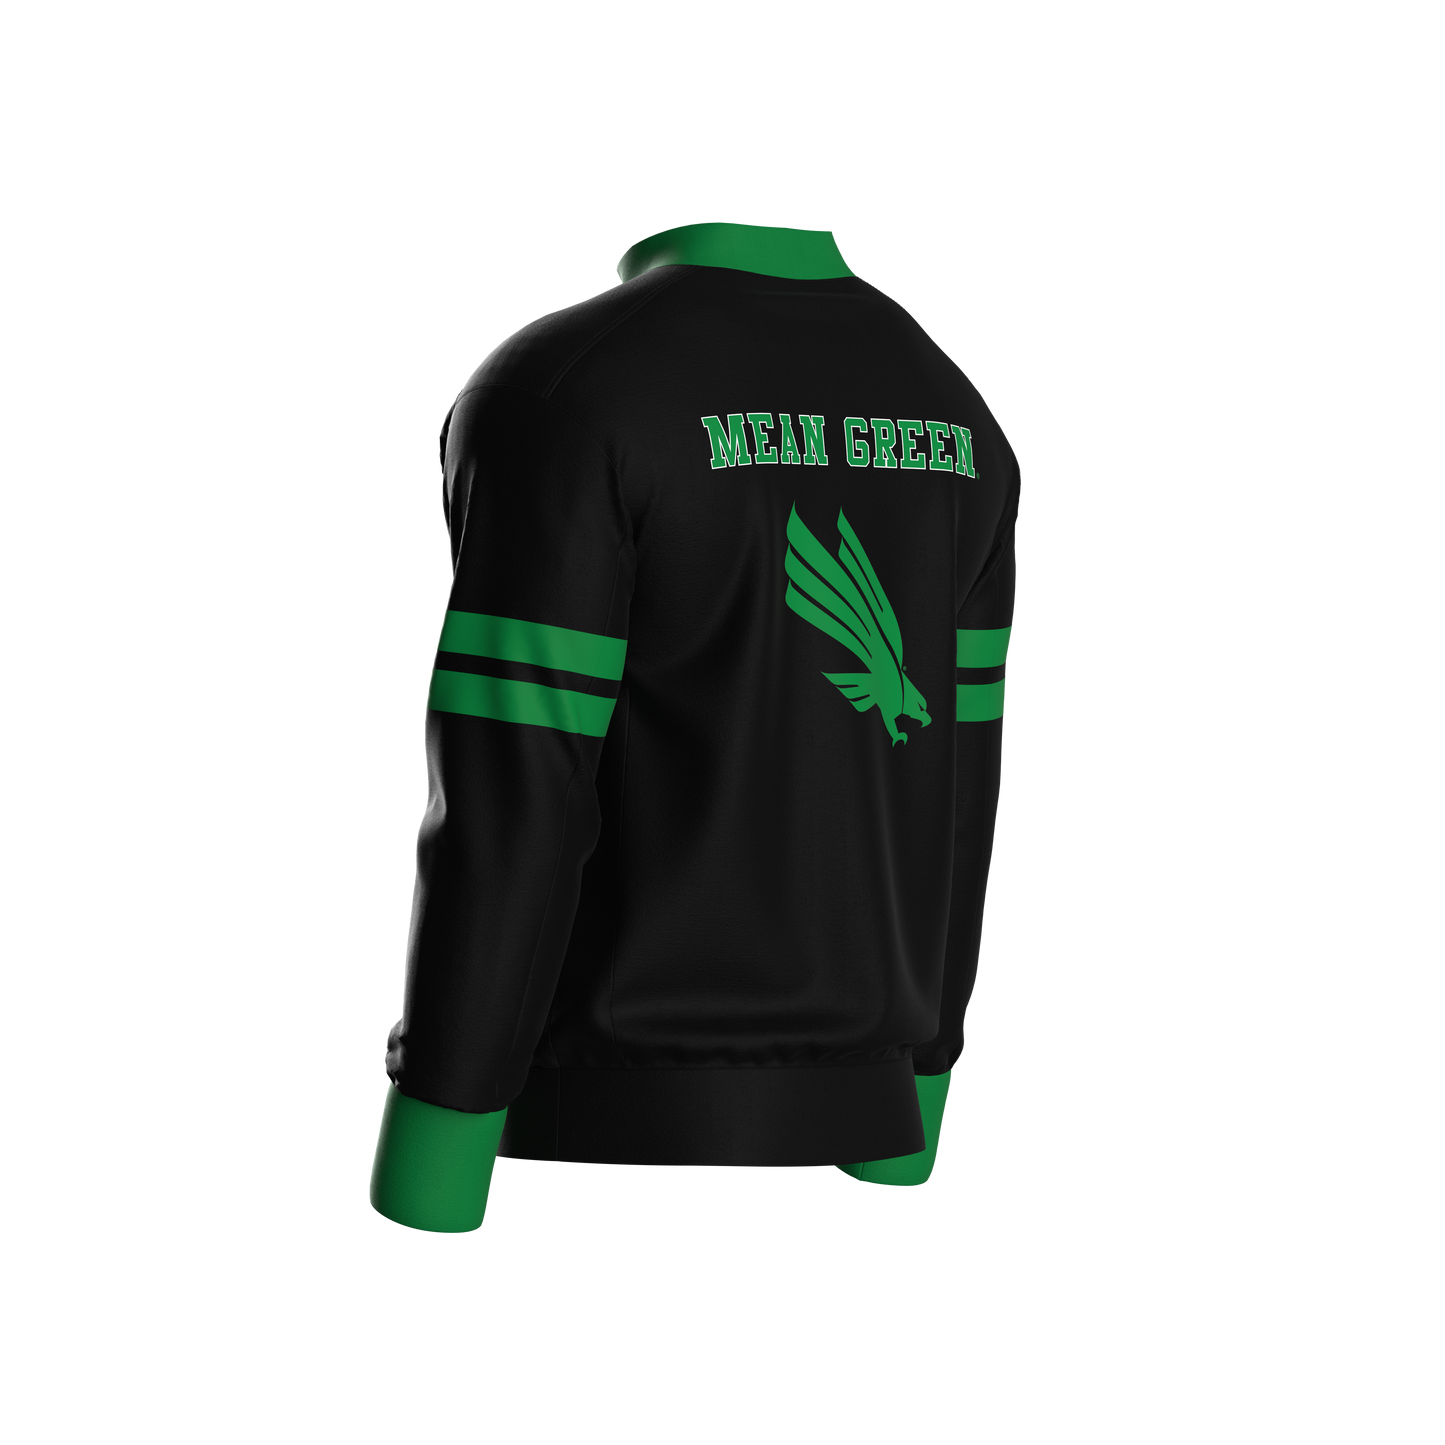 University of North Texas Away Pullover (youth)